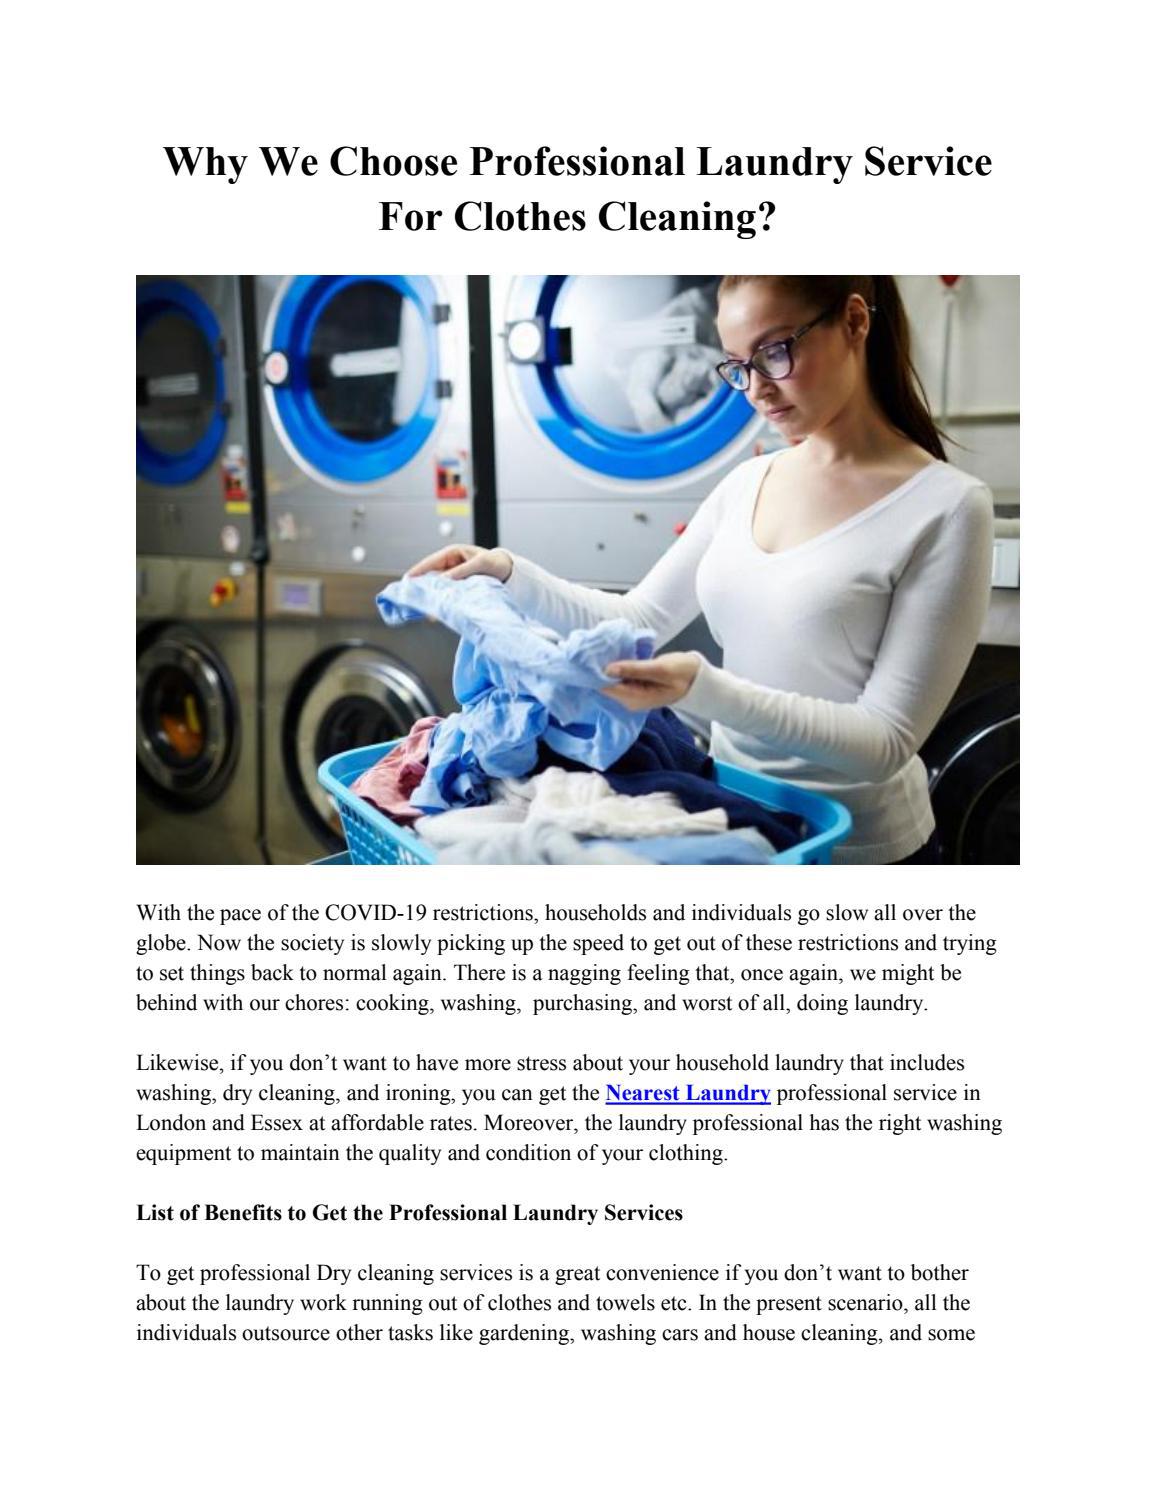 Why We Choose Professional Laundry Service For Clothes Cleaning?